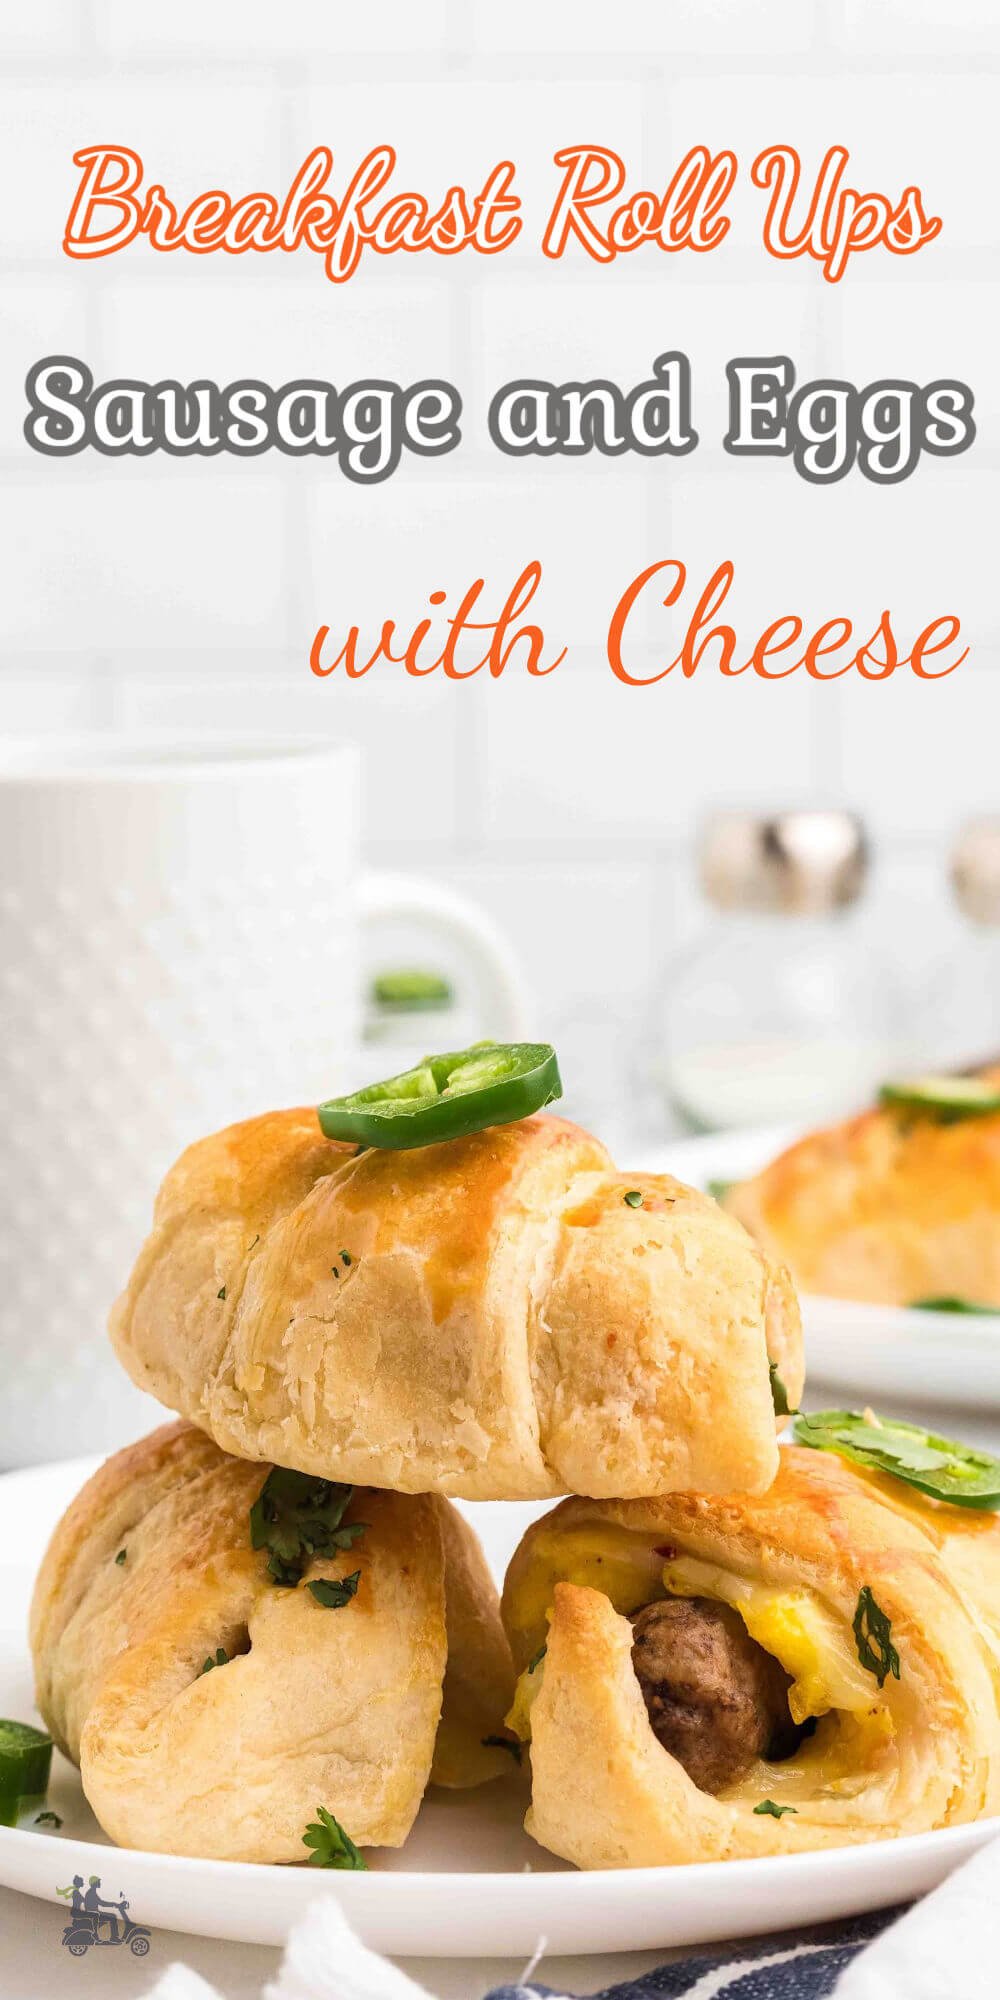 These easy Breakfast Sausage Rolls are perfect for camping, while you’re on the go, or as a convenient addition to the breakfast table. Add or swap the filling ingredients to suit your family! So simple and so delicious! Serve them to guests for breakfast or brunch, they're convenient and delicious.